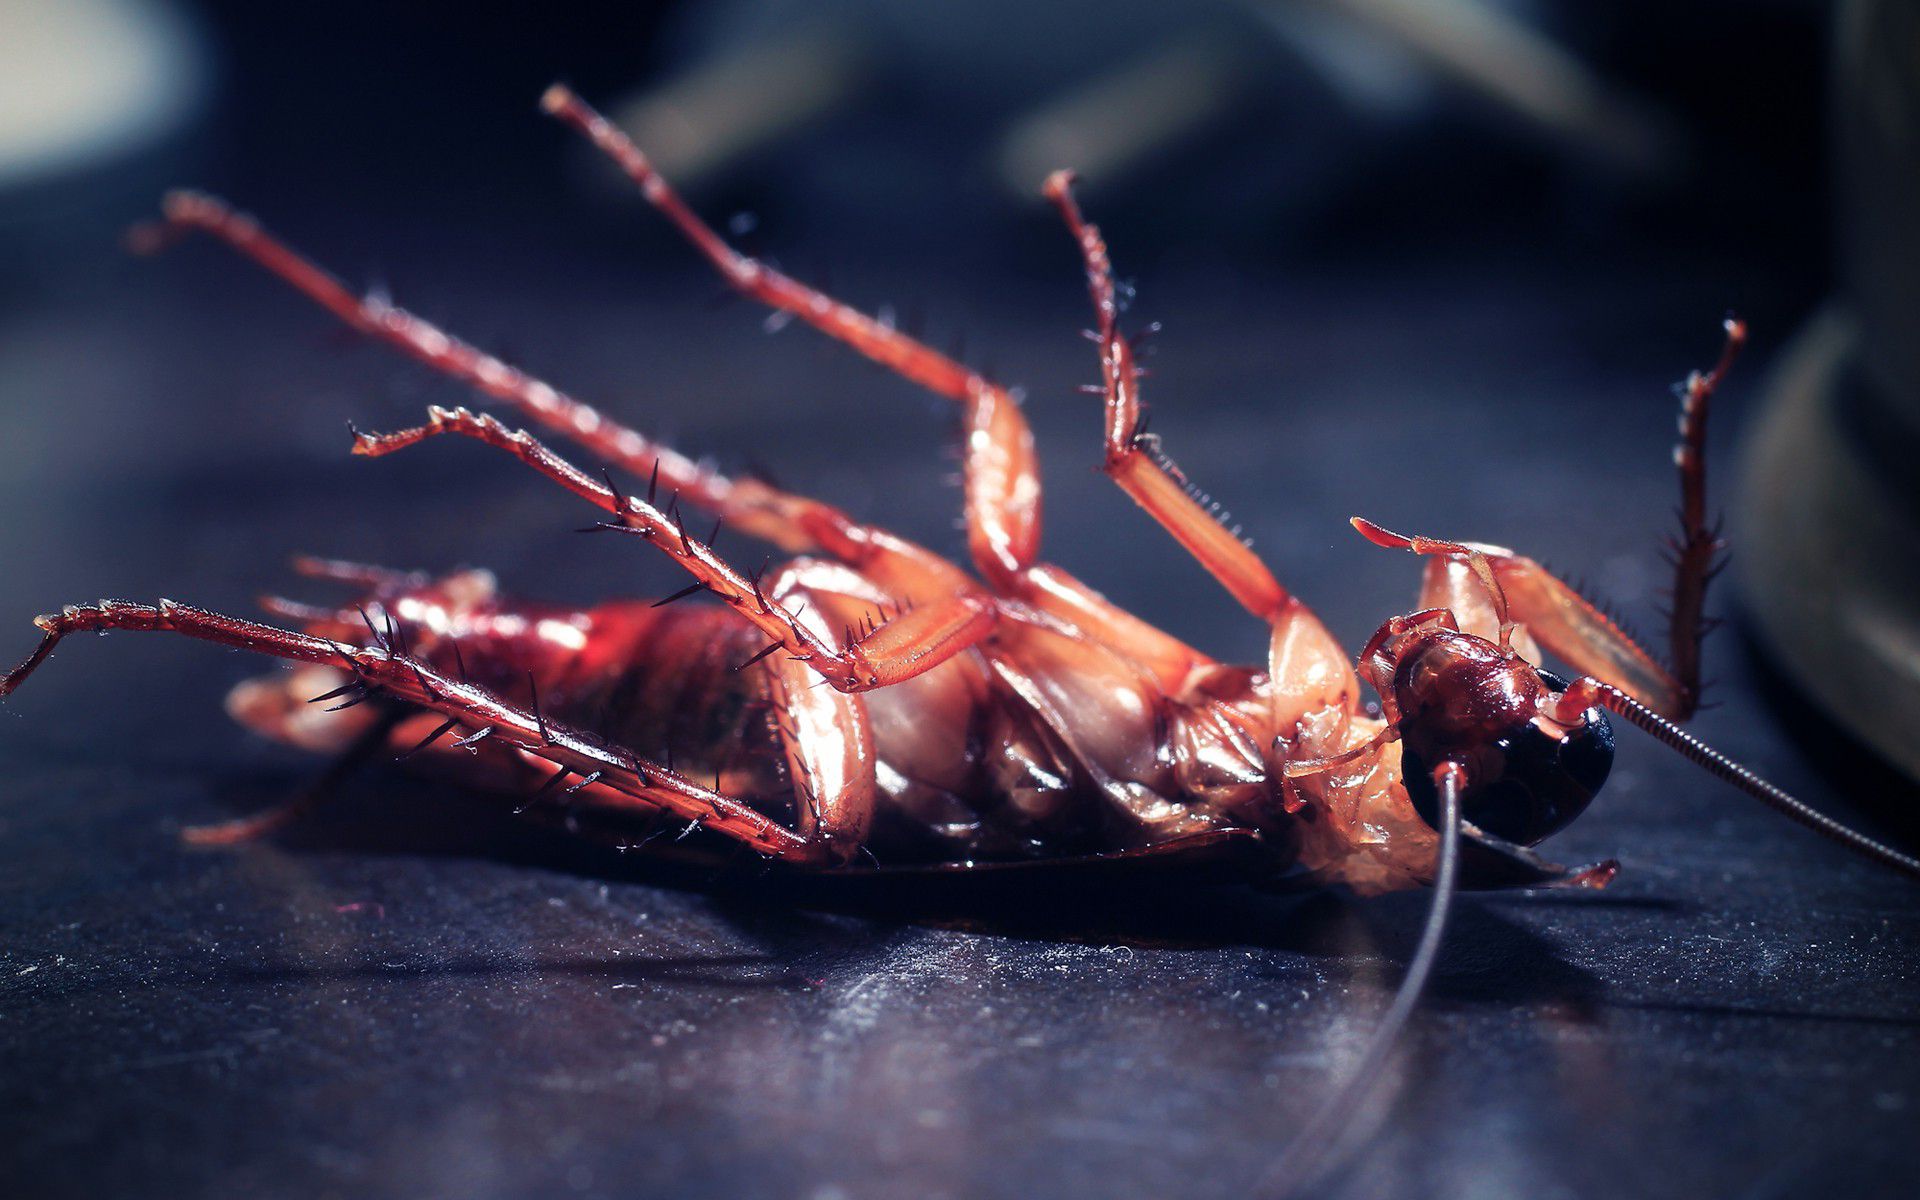 Habits That Can Attract Cockroaches & Other Pests